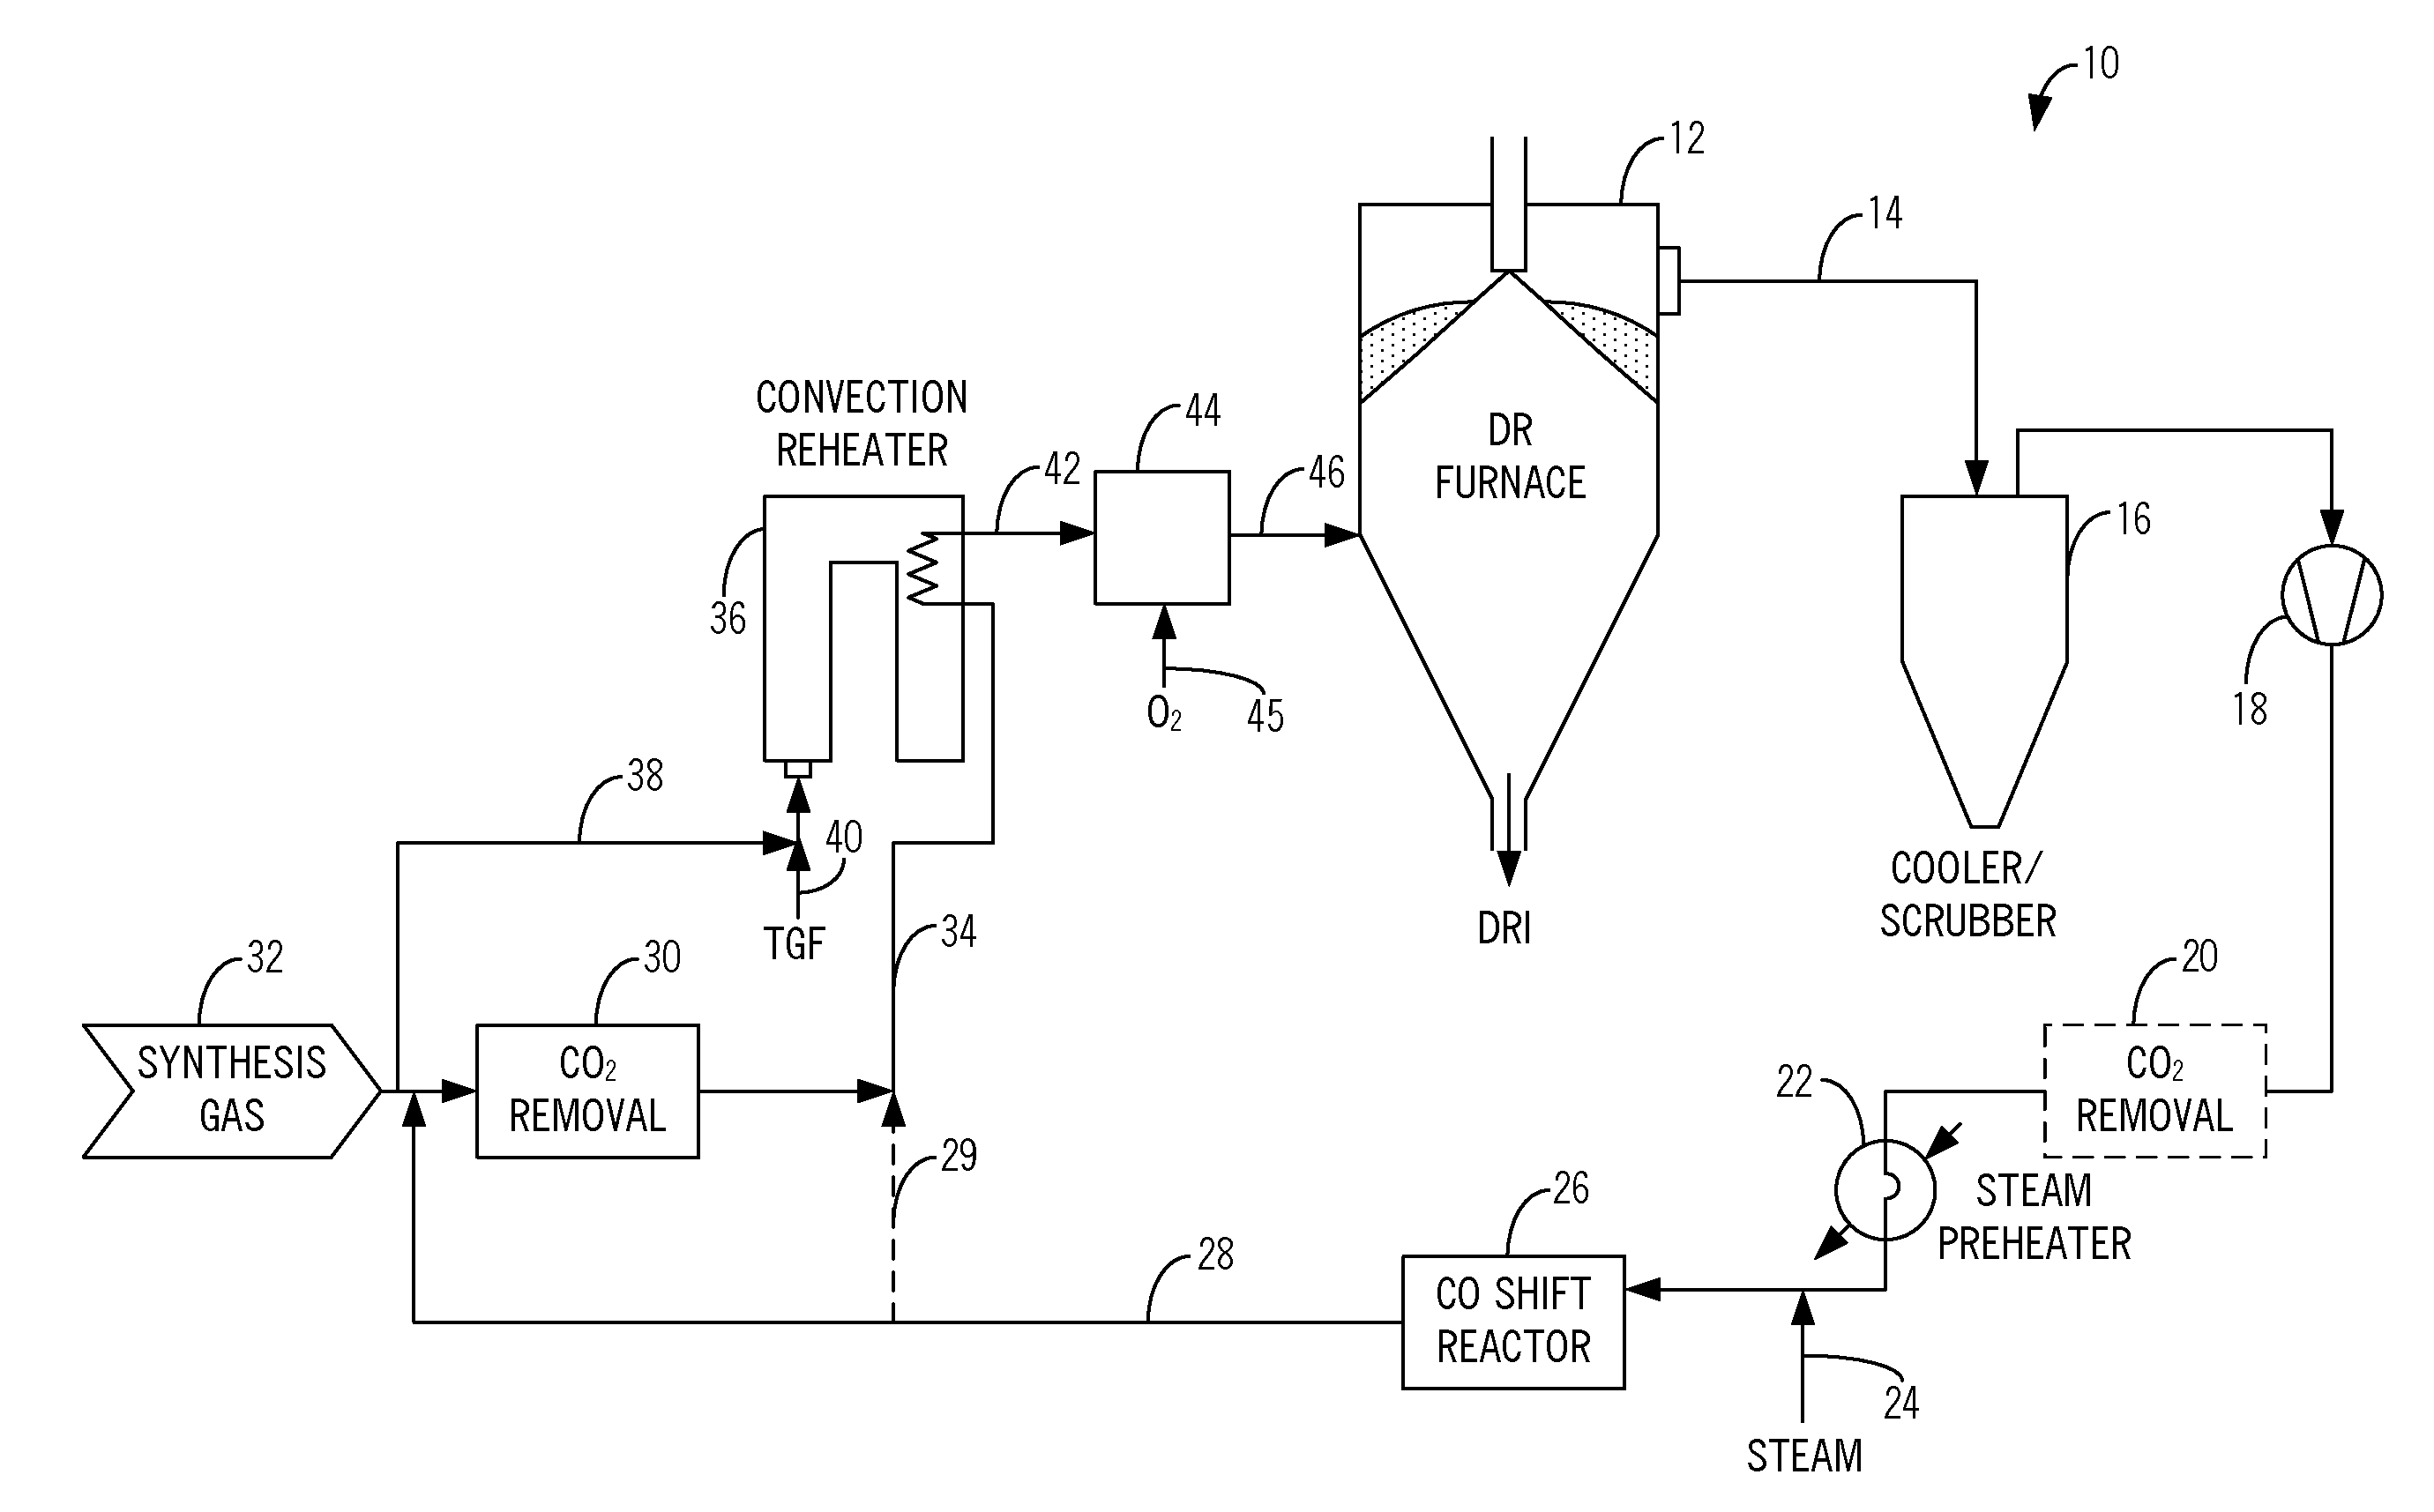 Method and system for the production of direct reduced iron using a synthesis gas with a high carbon monoxide content